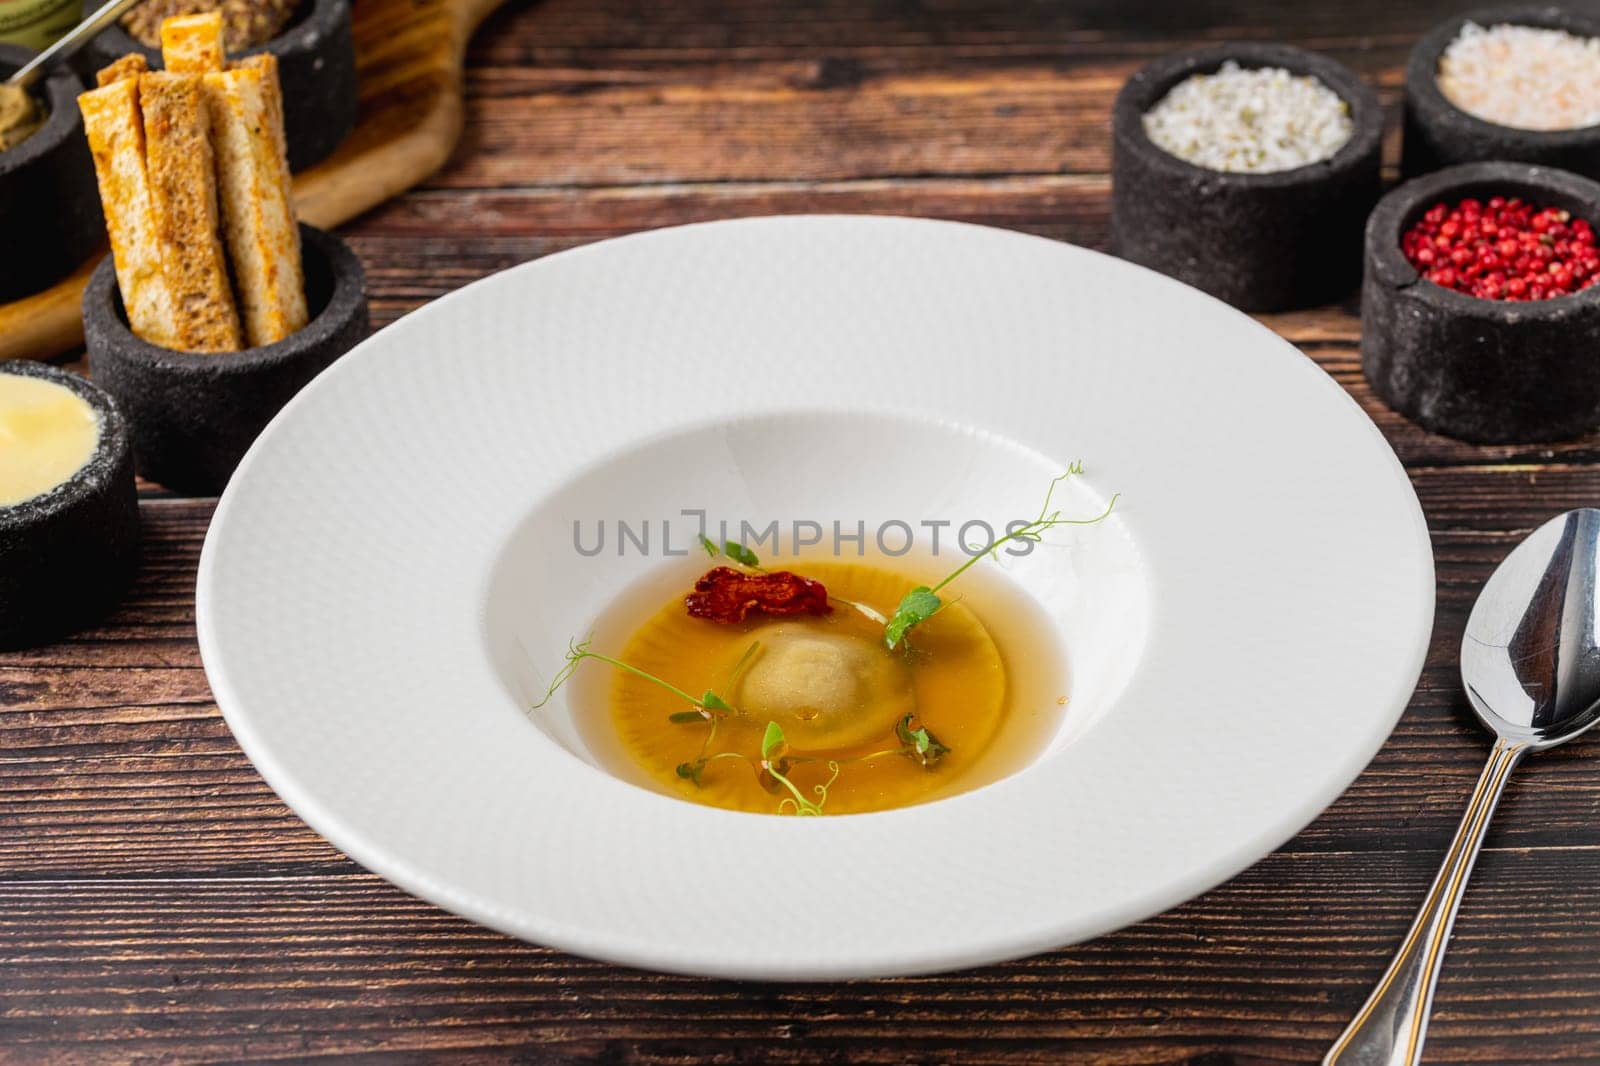 Ravioli consomme on a white porcelain plate. Healthy eating concept by Sonat